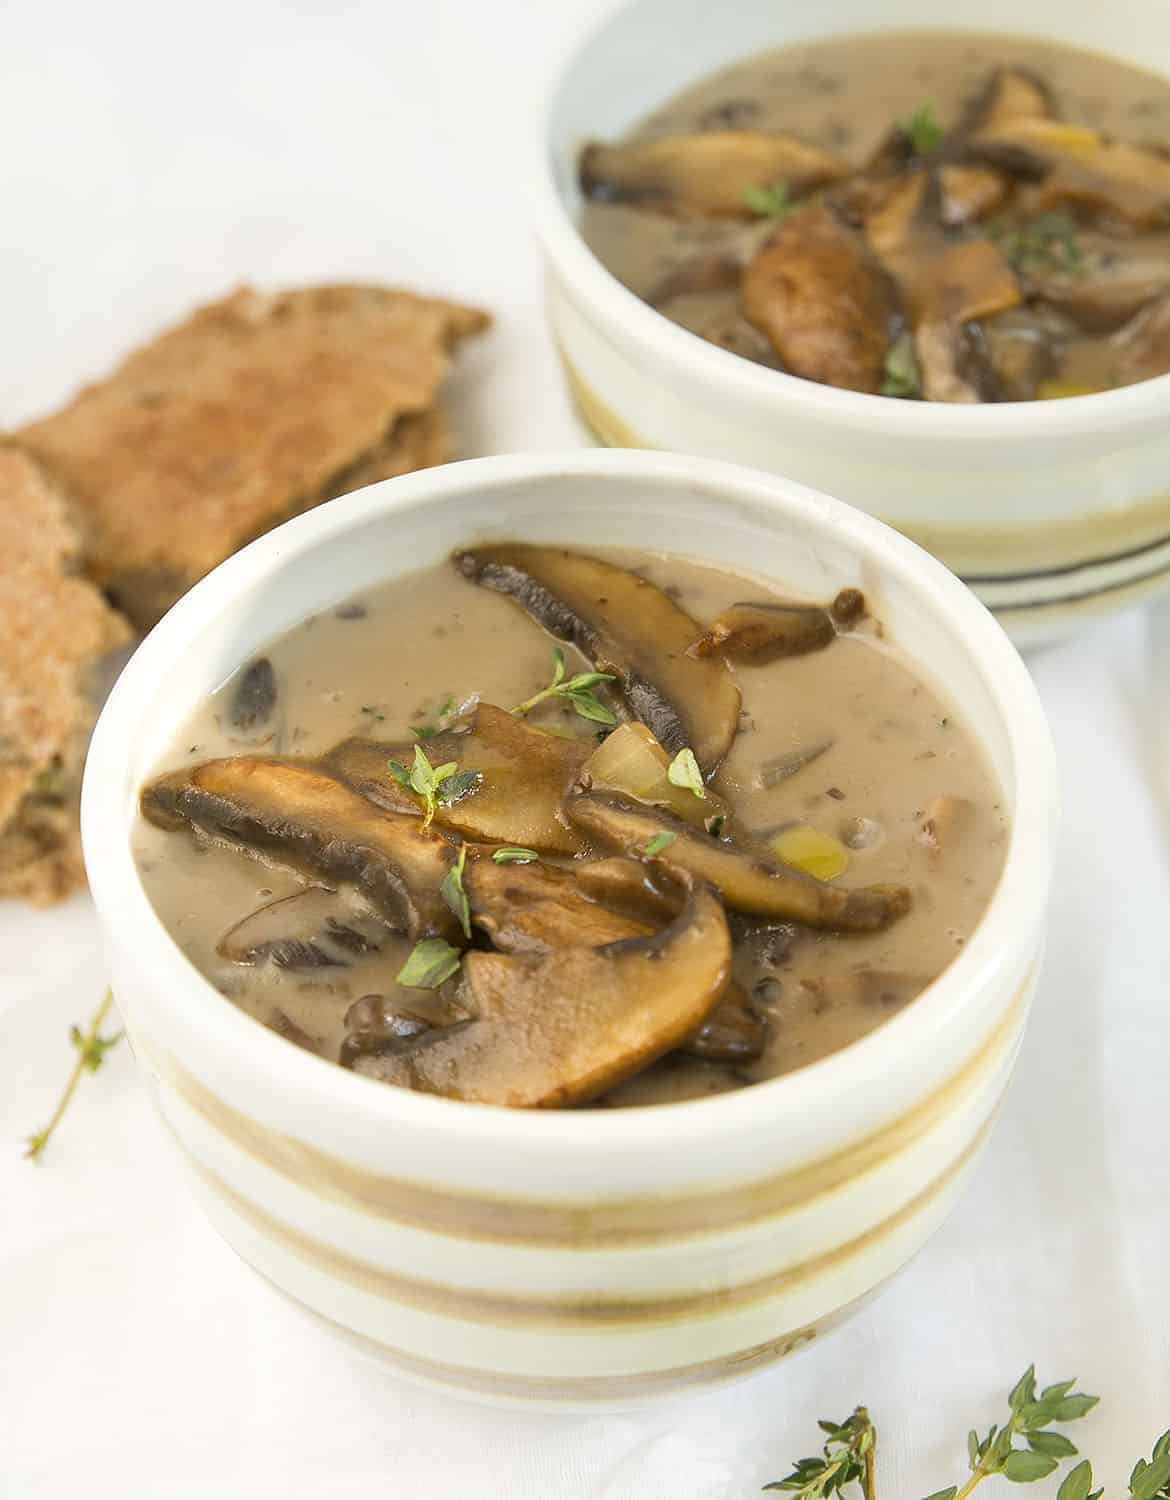 Two bowls full of healthy mushroom soups, two pieces of bread in the background.